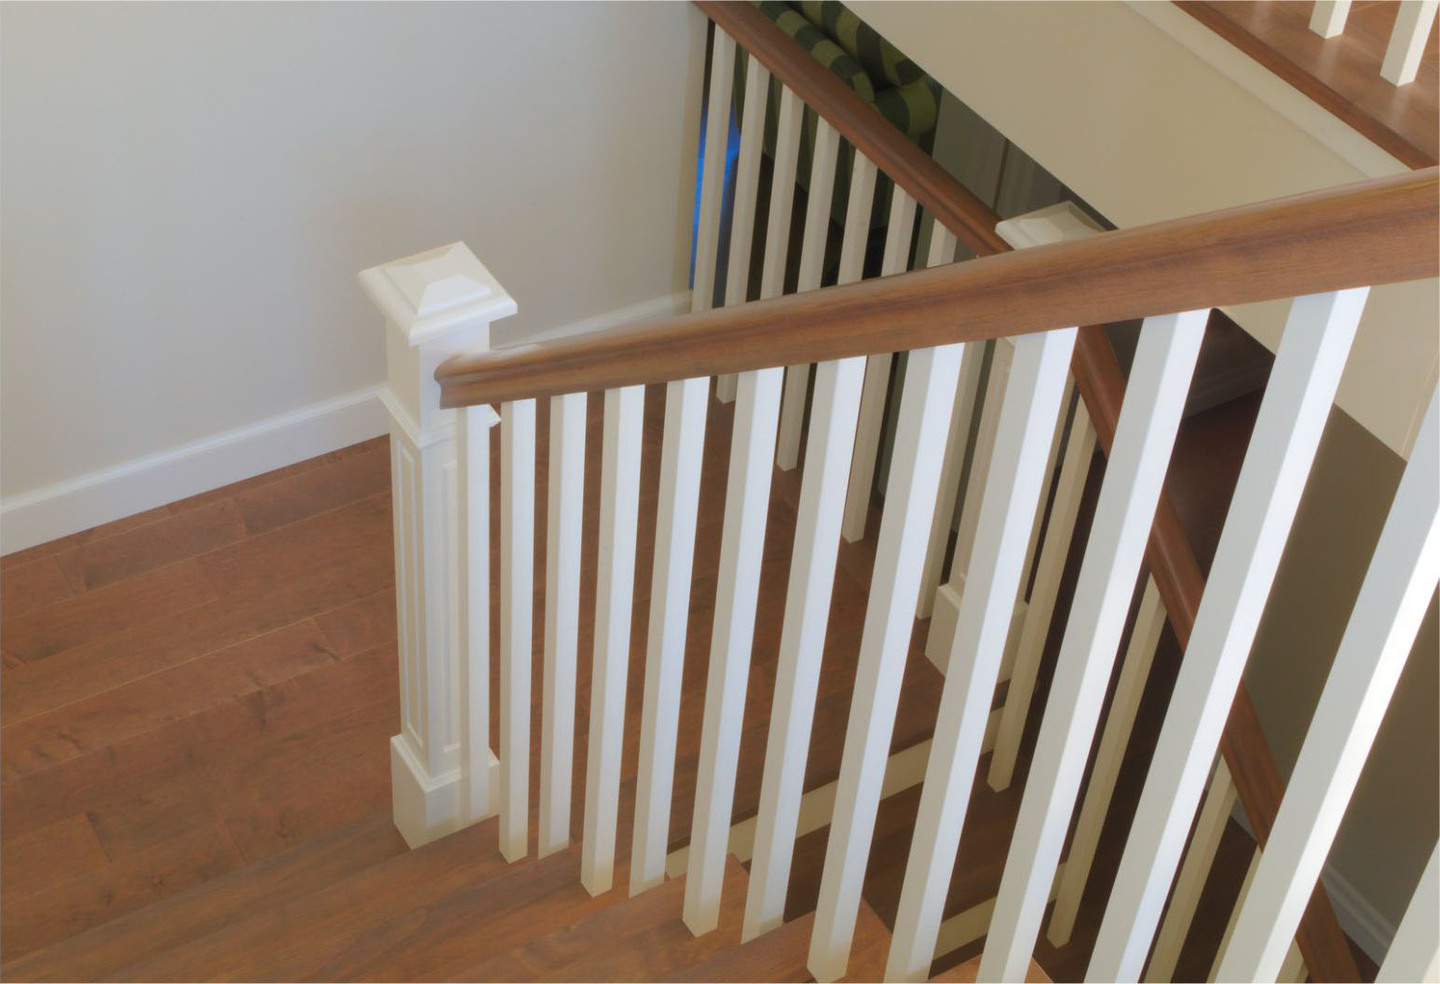 Very different staircase. Good solution for a steep set of stairs.